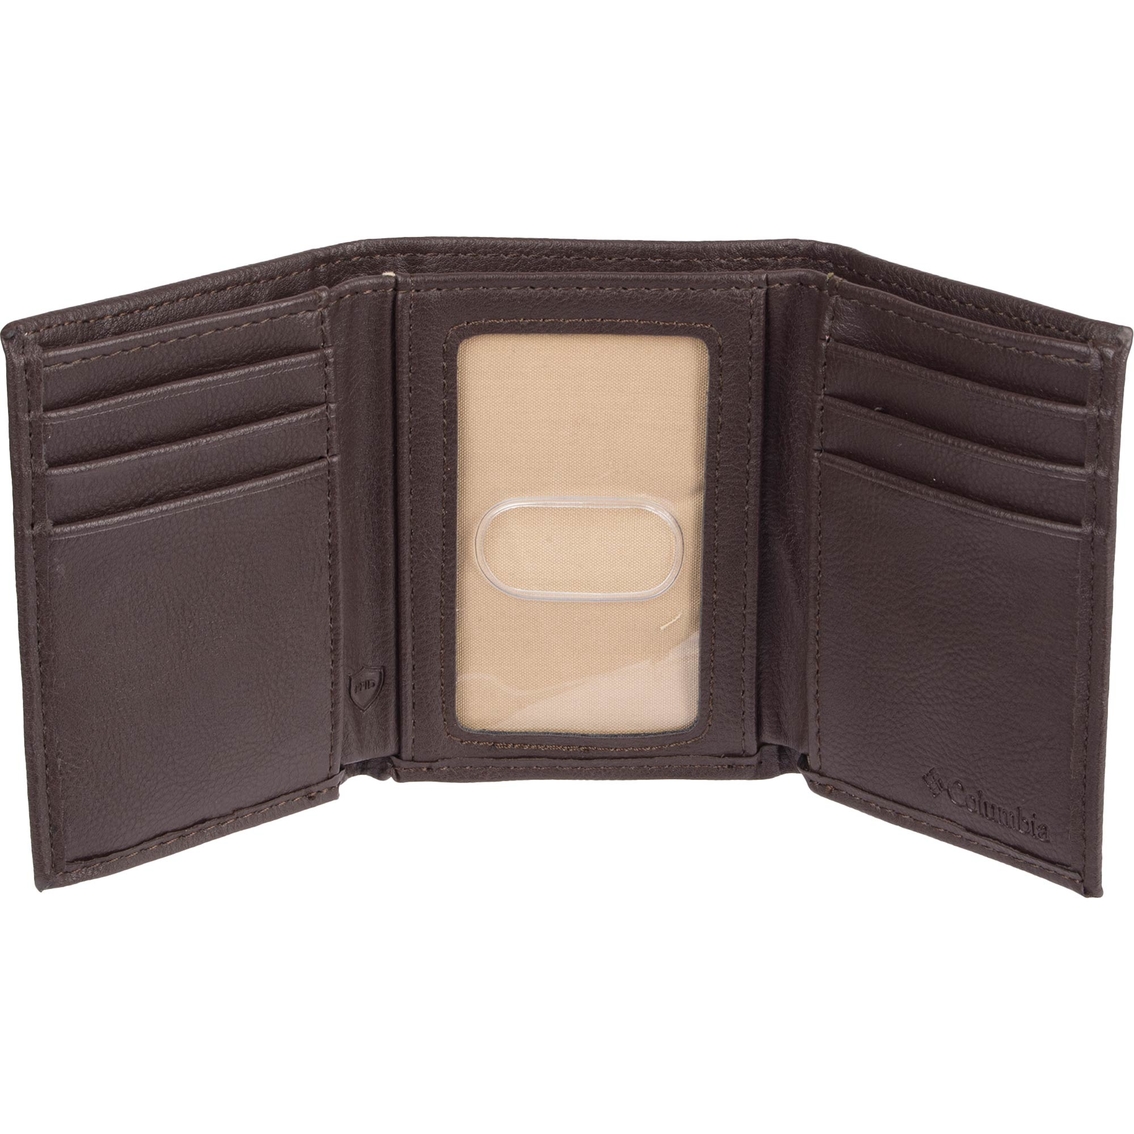 Columbia RFID Trifold Wallet - Image 3 of 3